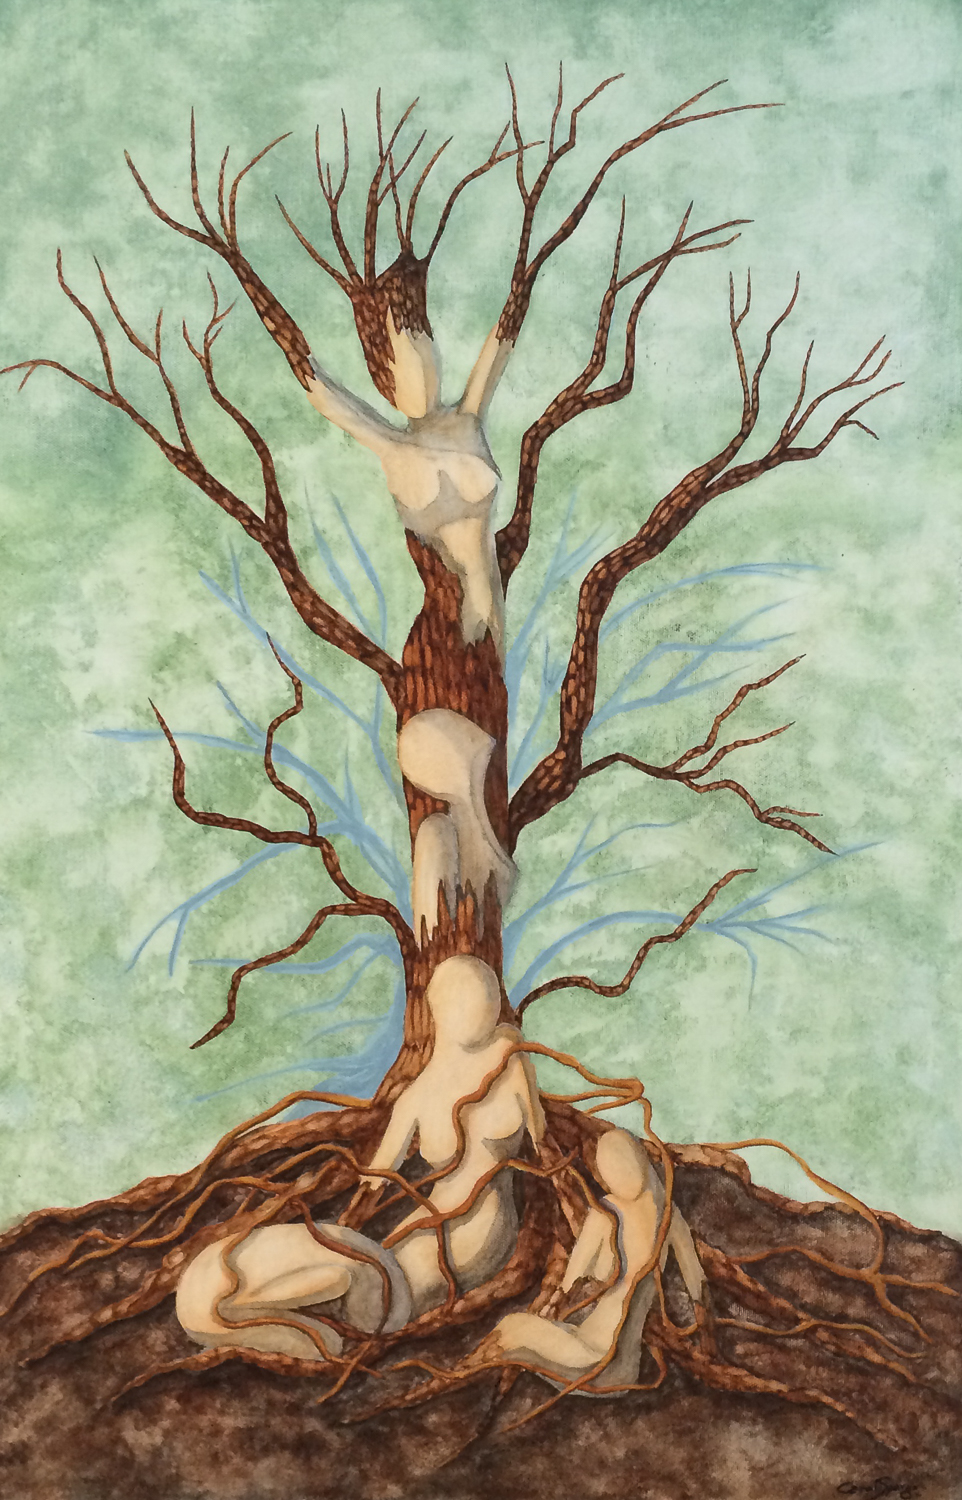 Painting of human bodies growing into a tree, looking proud at the top canopy 